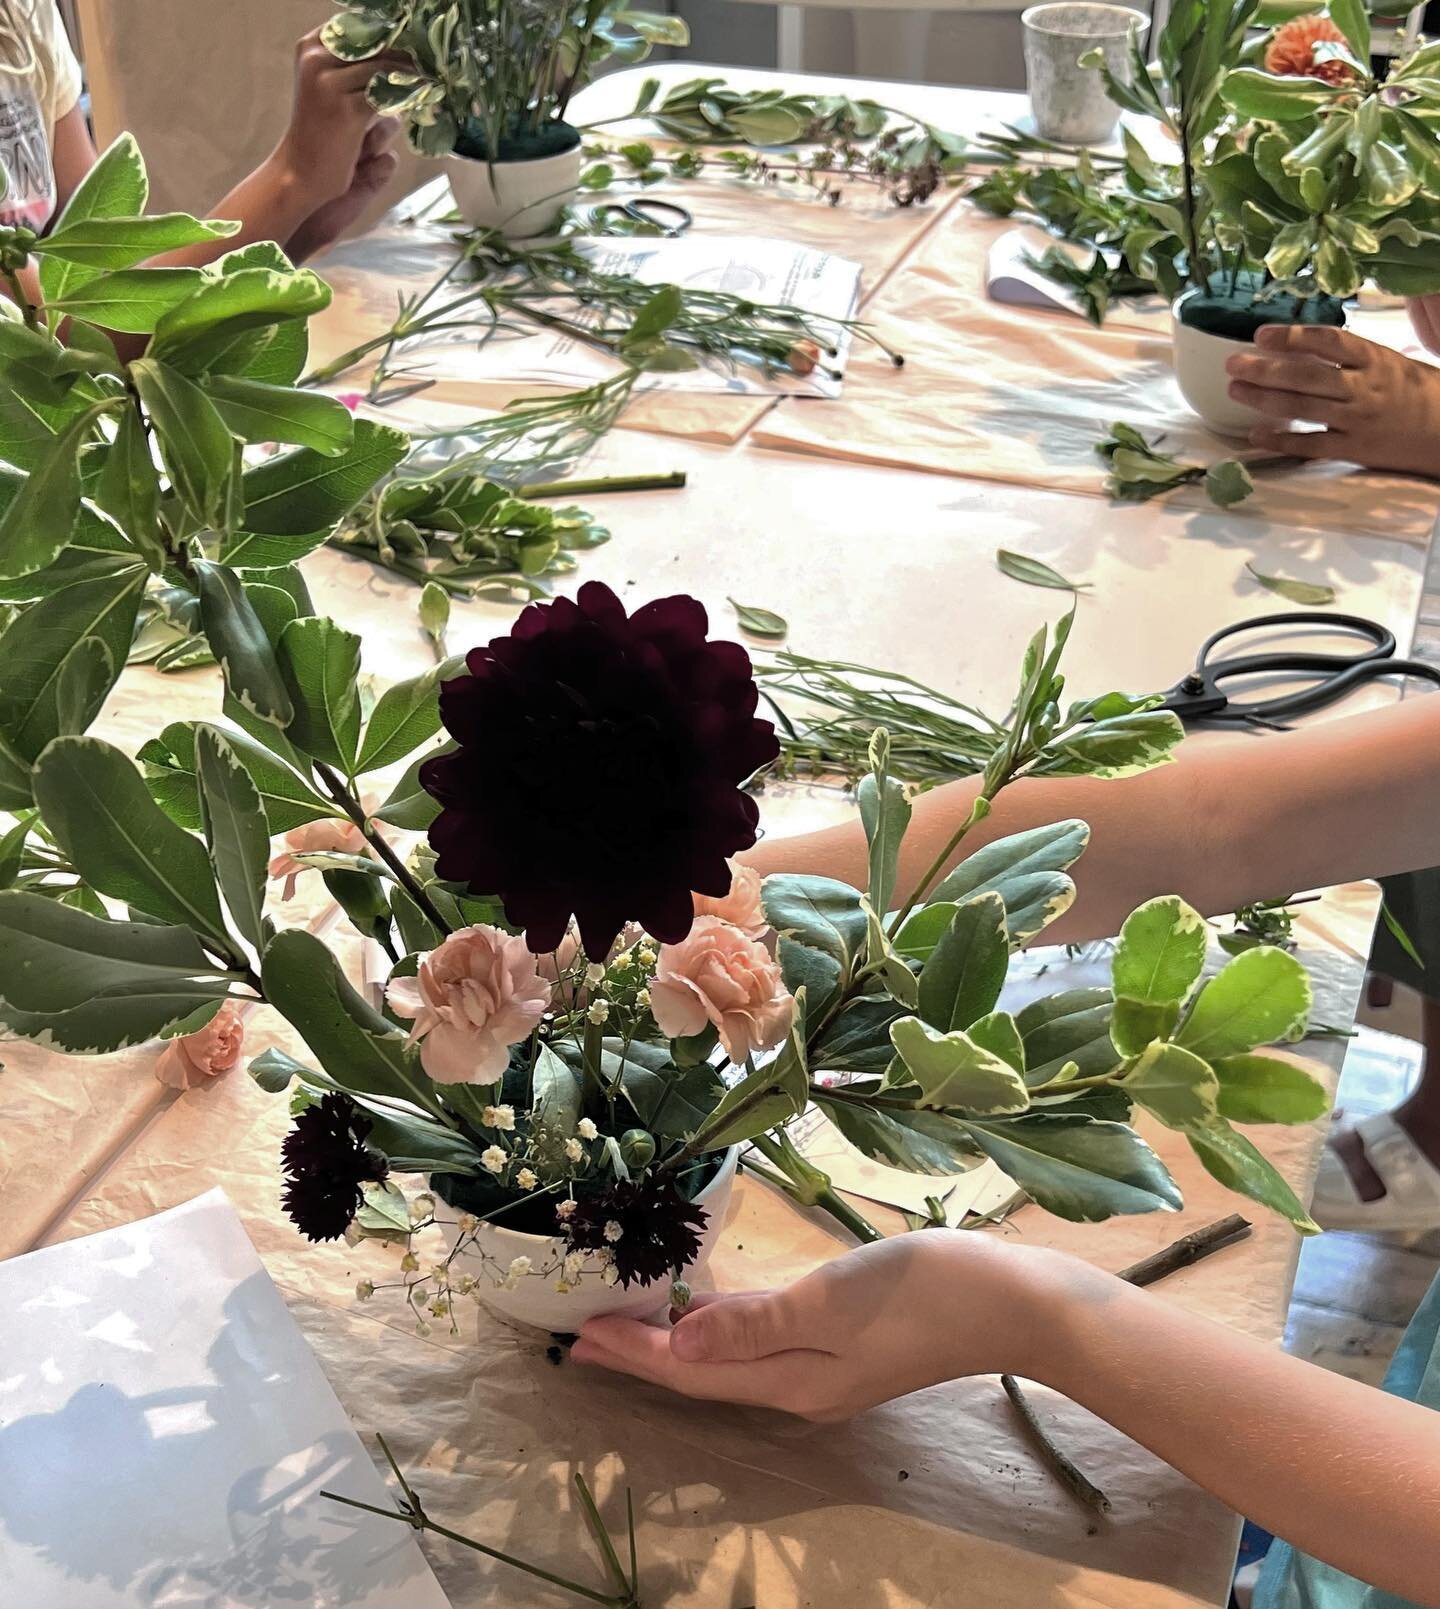 @conodio store is open on weekends on The Loft! 

The beautiful little flower shop will be offering table flower arrangements and more! Come by and visit from 11:00-18:00! 

Next week store hour will be
9/9 Friday 11:00-18:00
9/10 Saturday 11:00-18:0